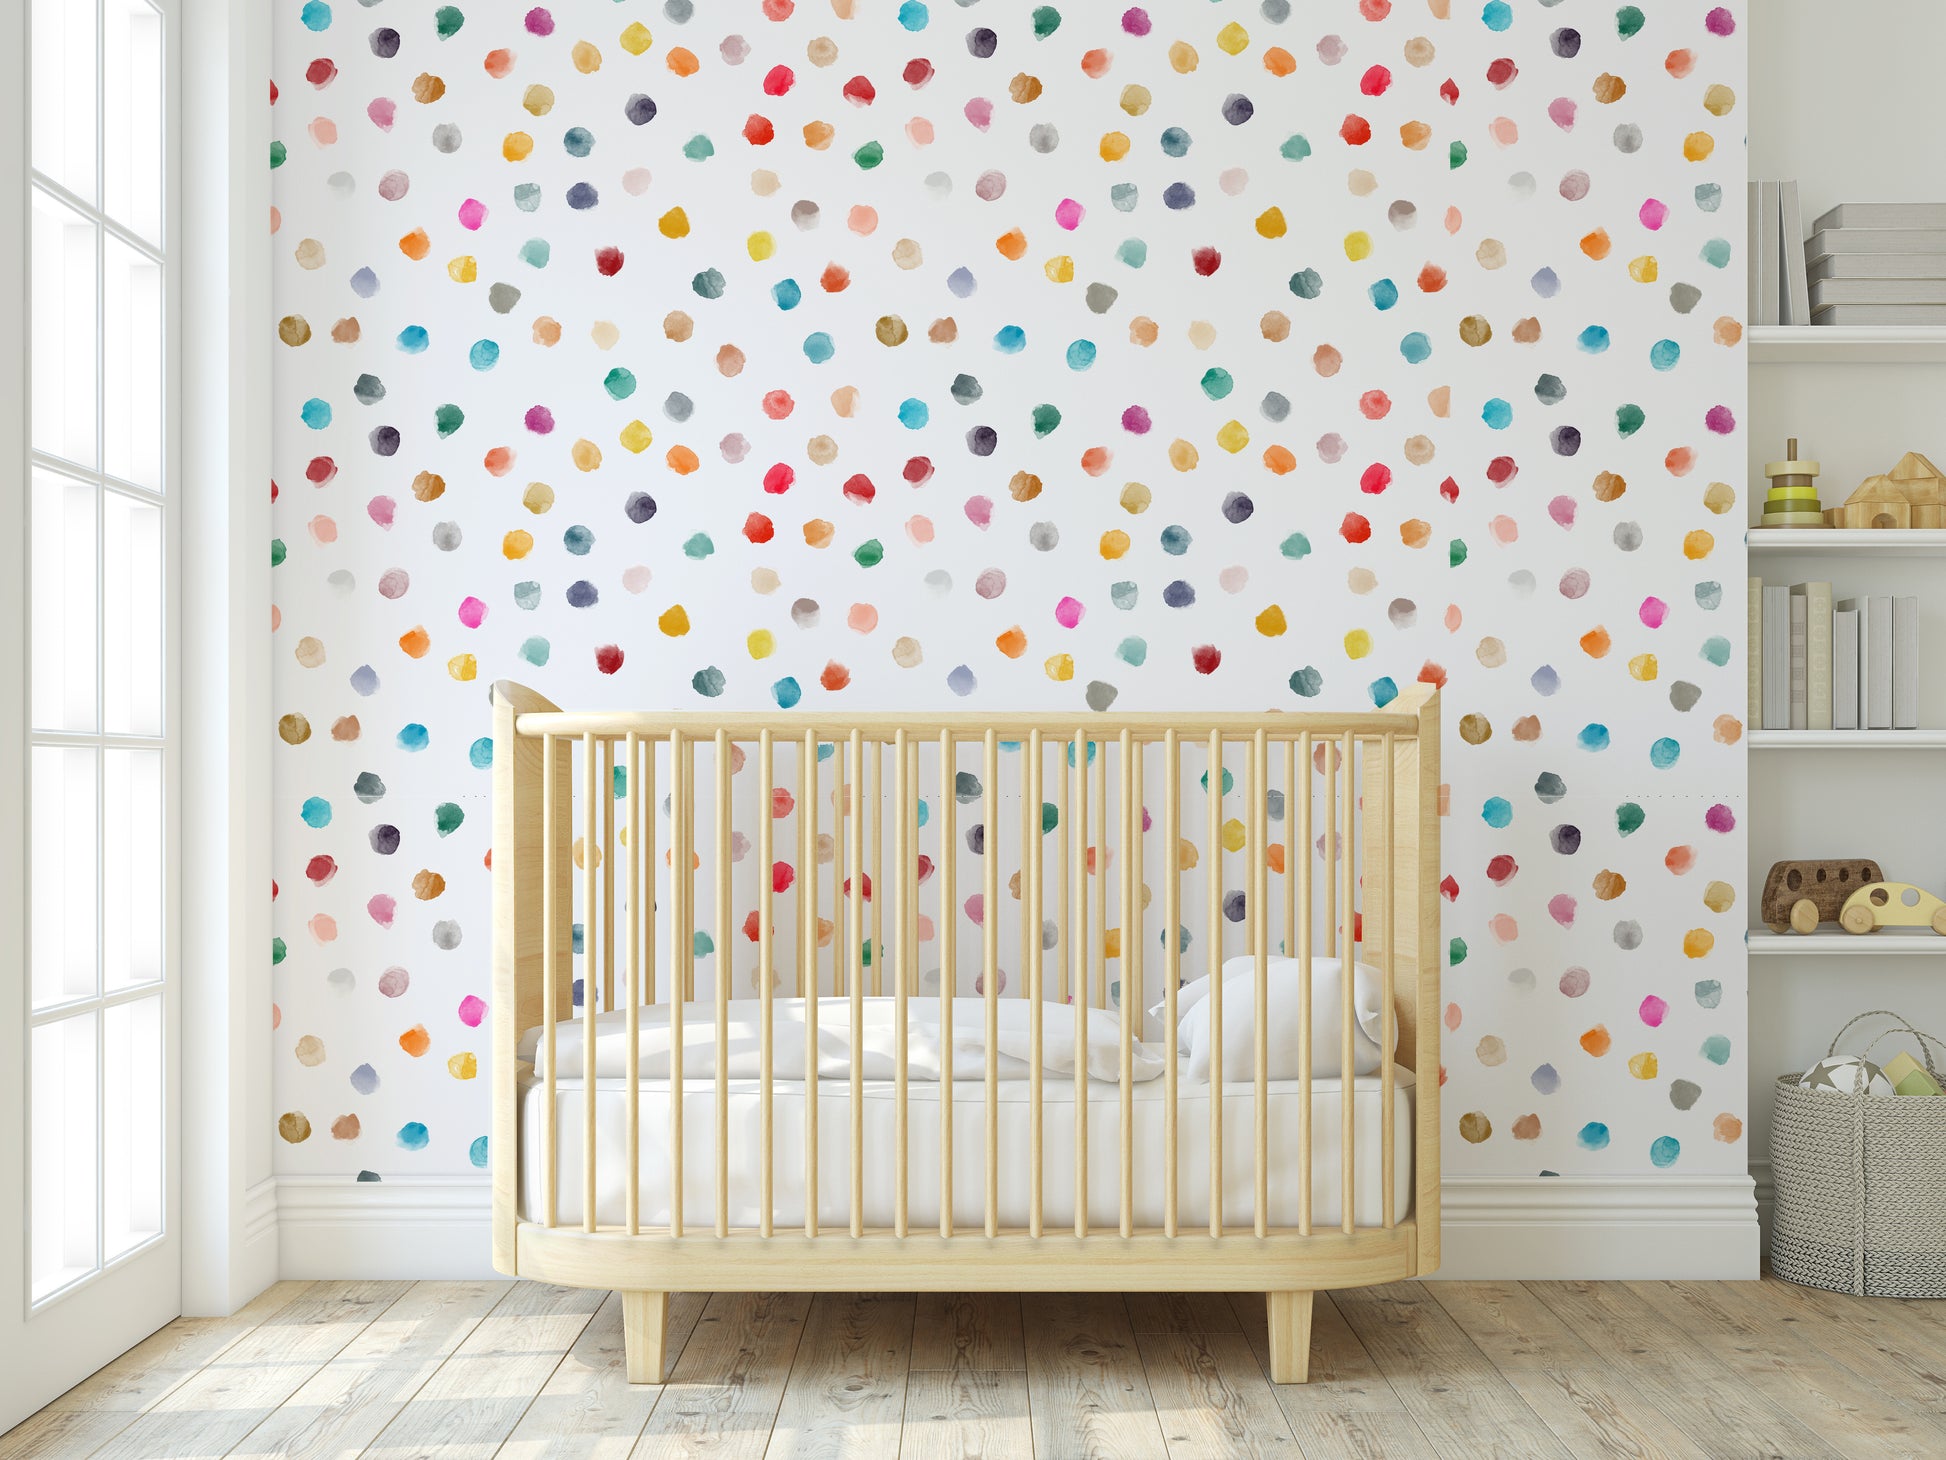 Rainbow polka dot removable peel and stick wallpaper in nursery